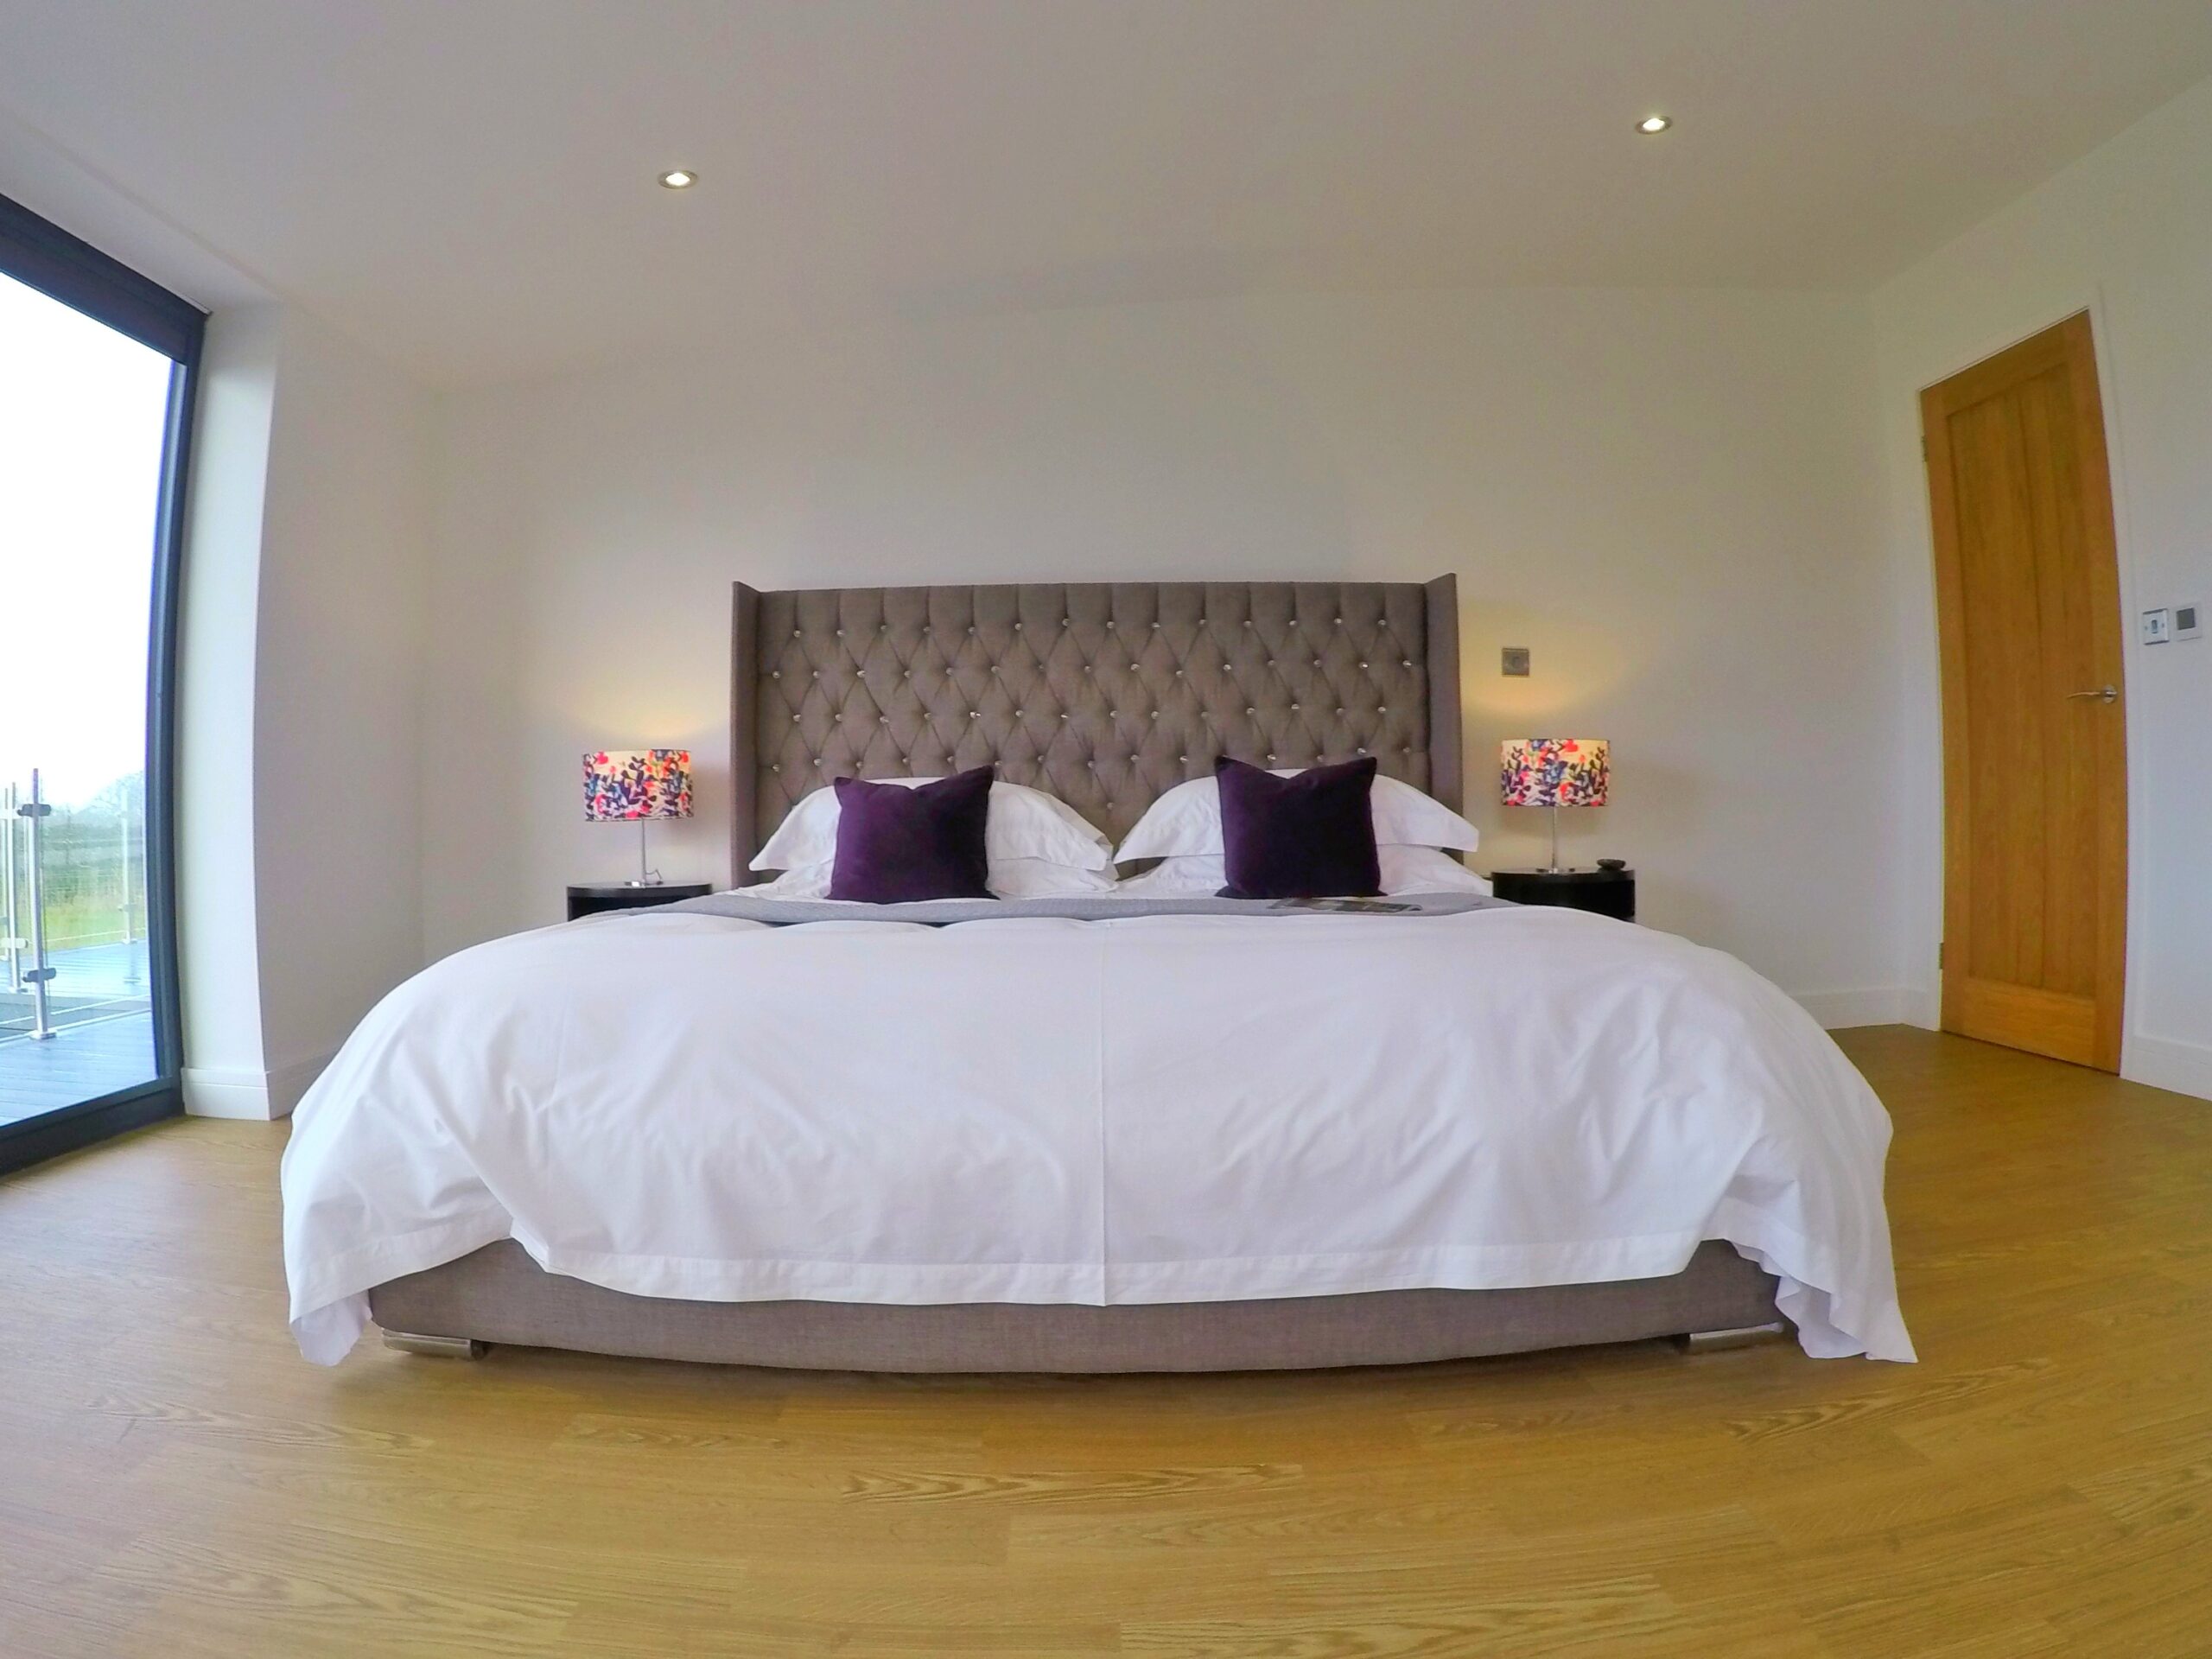 Spacious master bedroom with superking bed in misty grey with large headboard. White cotton bedding, grey throw and purple cushions. Lamps on tables next to bed with brightly coloured shades. Oak door.